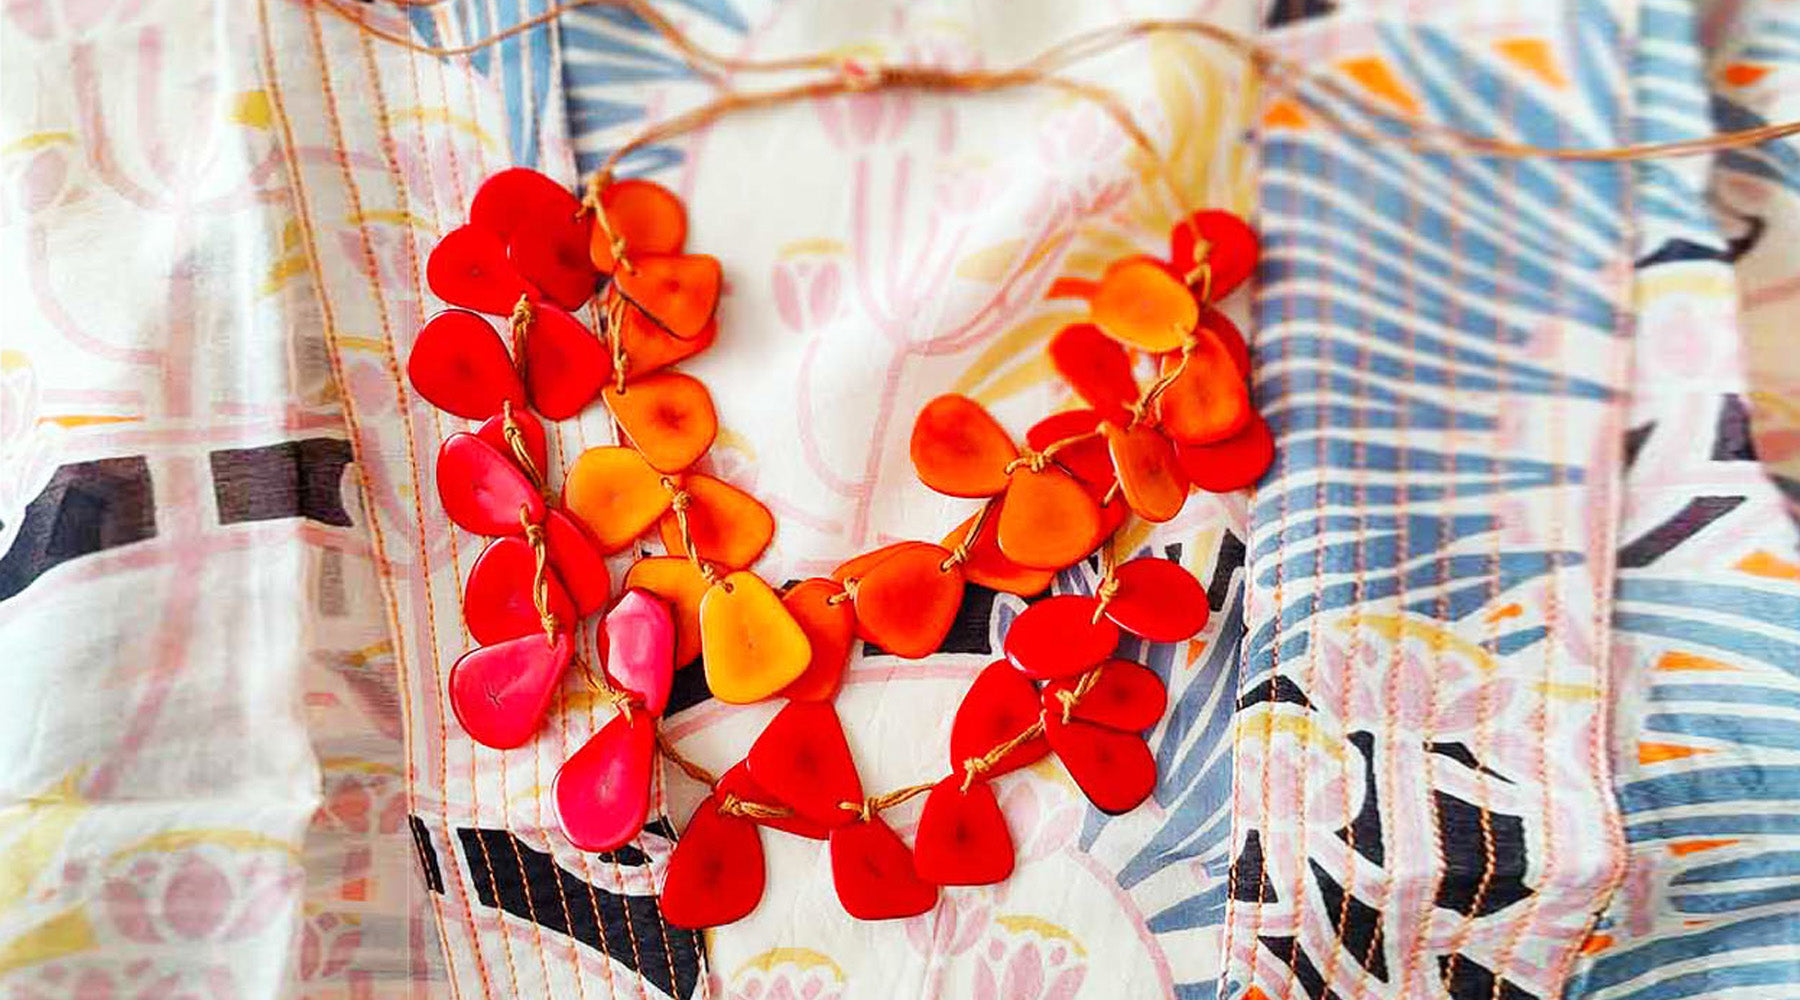 A colourful orange necklace set against a cream and blue background with a leafy print.